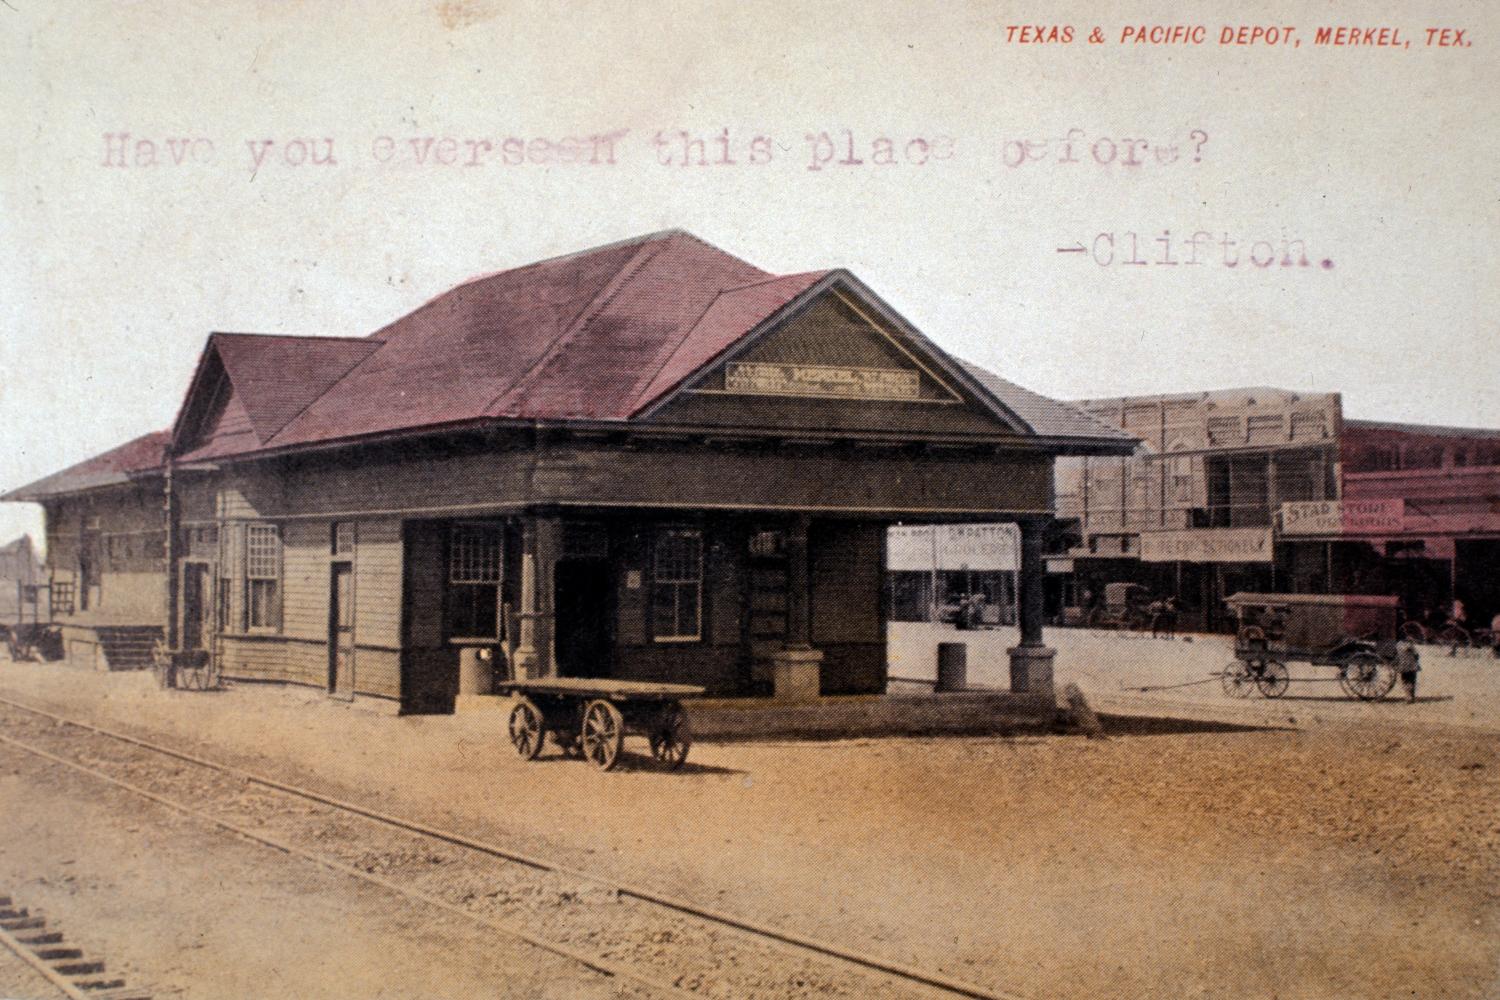 Images of Texas & Pacific Stations and Structures in  Merkel, TX